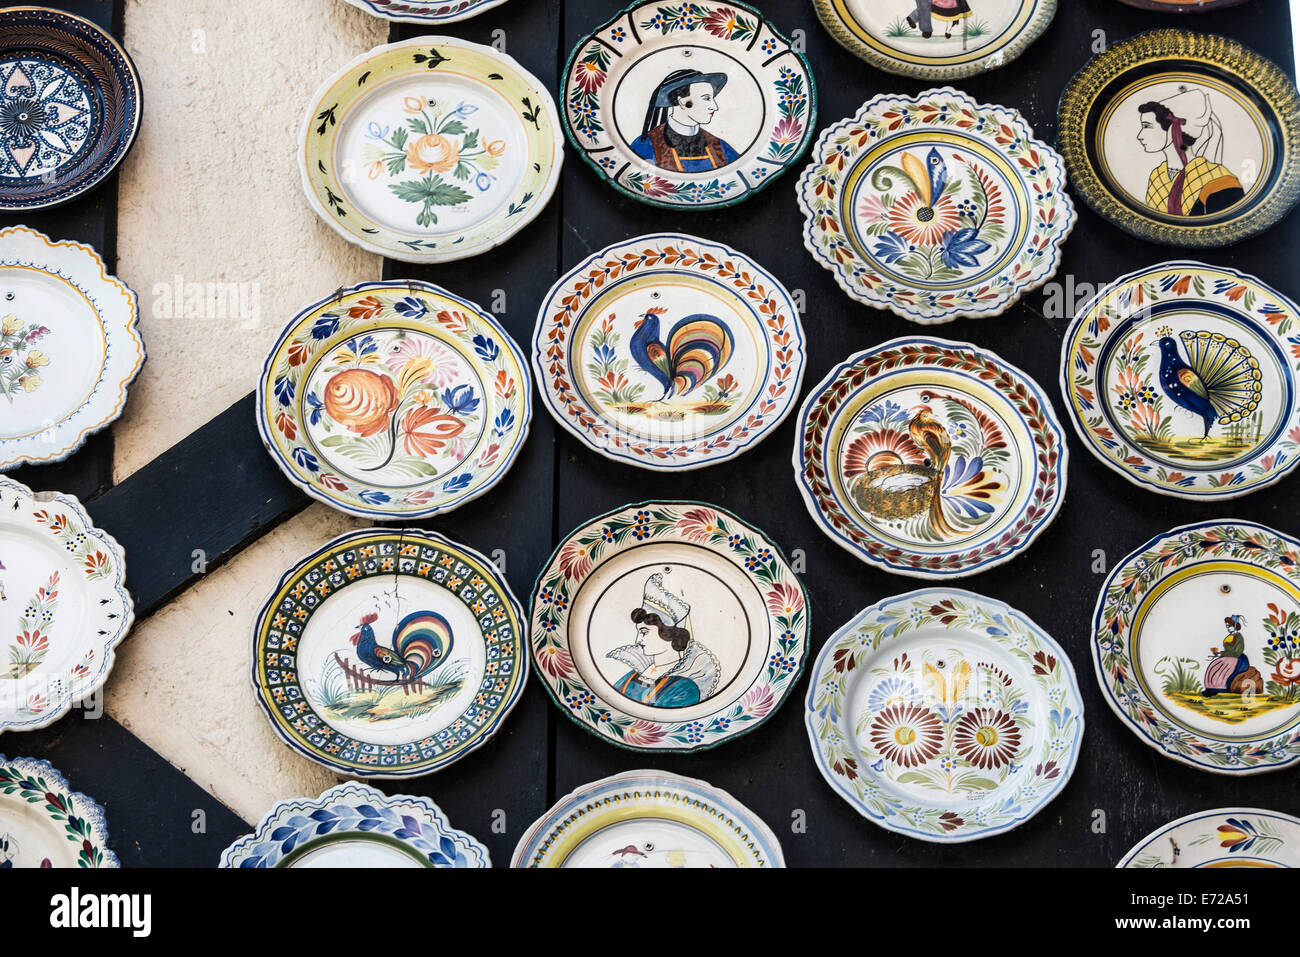 Faience ware, typical painted earthenware plates, Quimper, Brittany, France Stock Photo